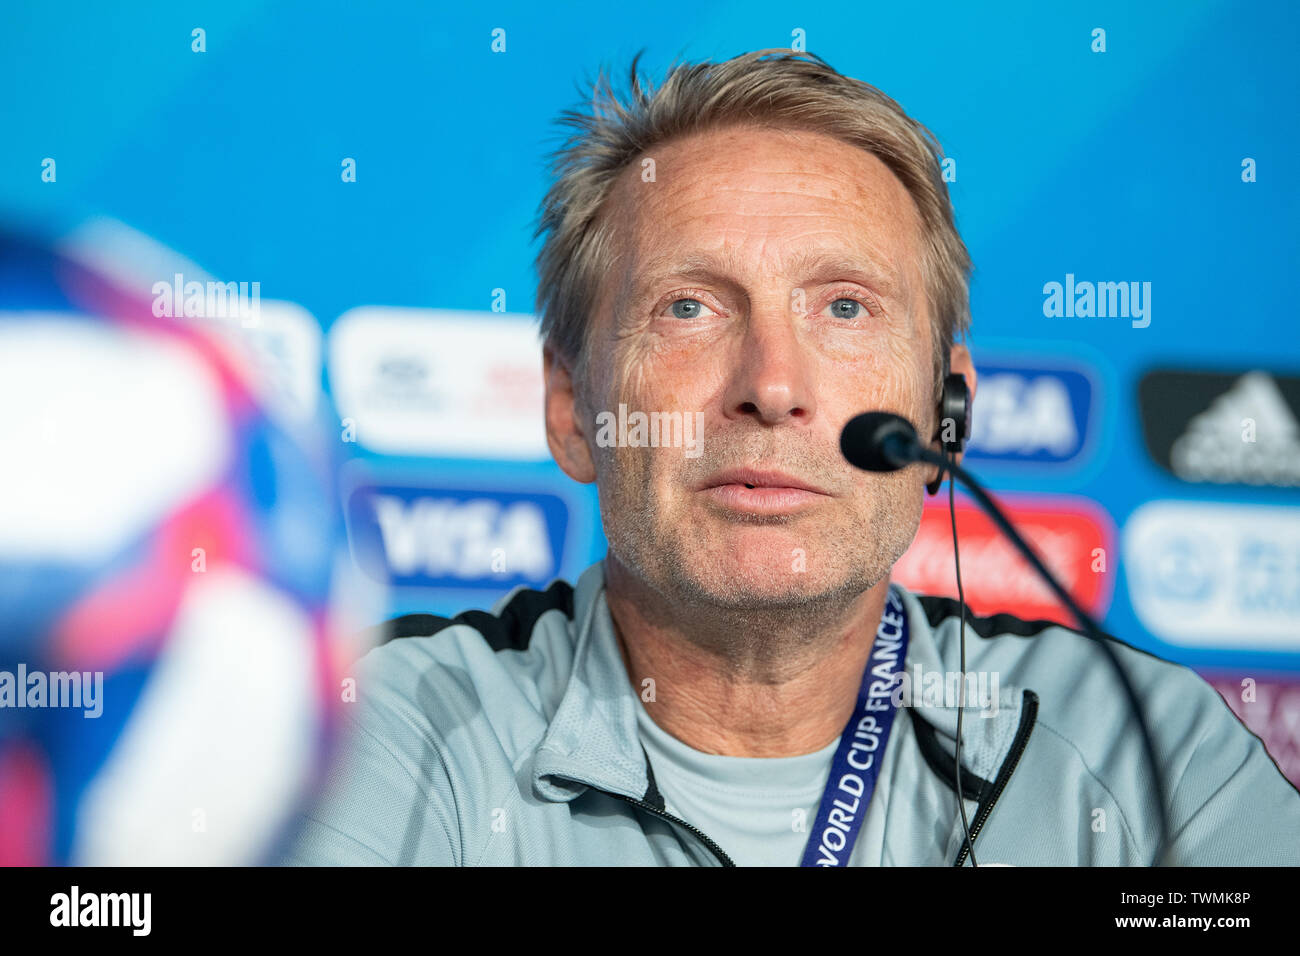 21 June 2019, France (France), Grenoble: Football, women: World Cup, national team, Nigeria, final press conference: Thomas Dennerby, Swedish coach of the Nigerian women's national team, speaks. Photo: Sebastian Gollnow/dpa Stock Photo